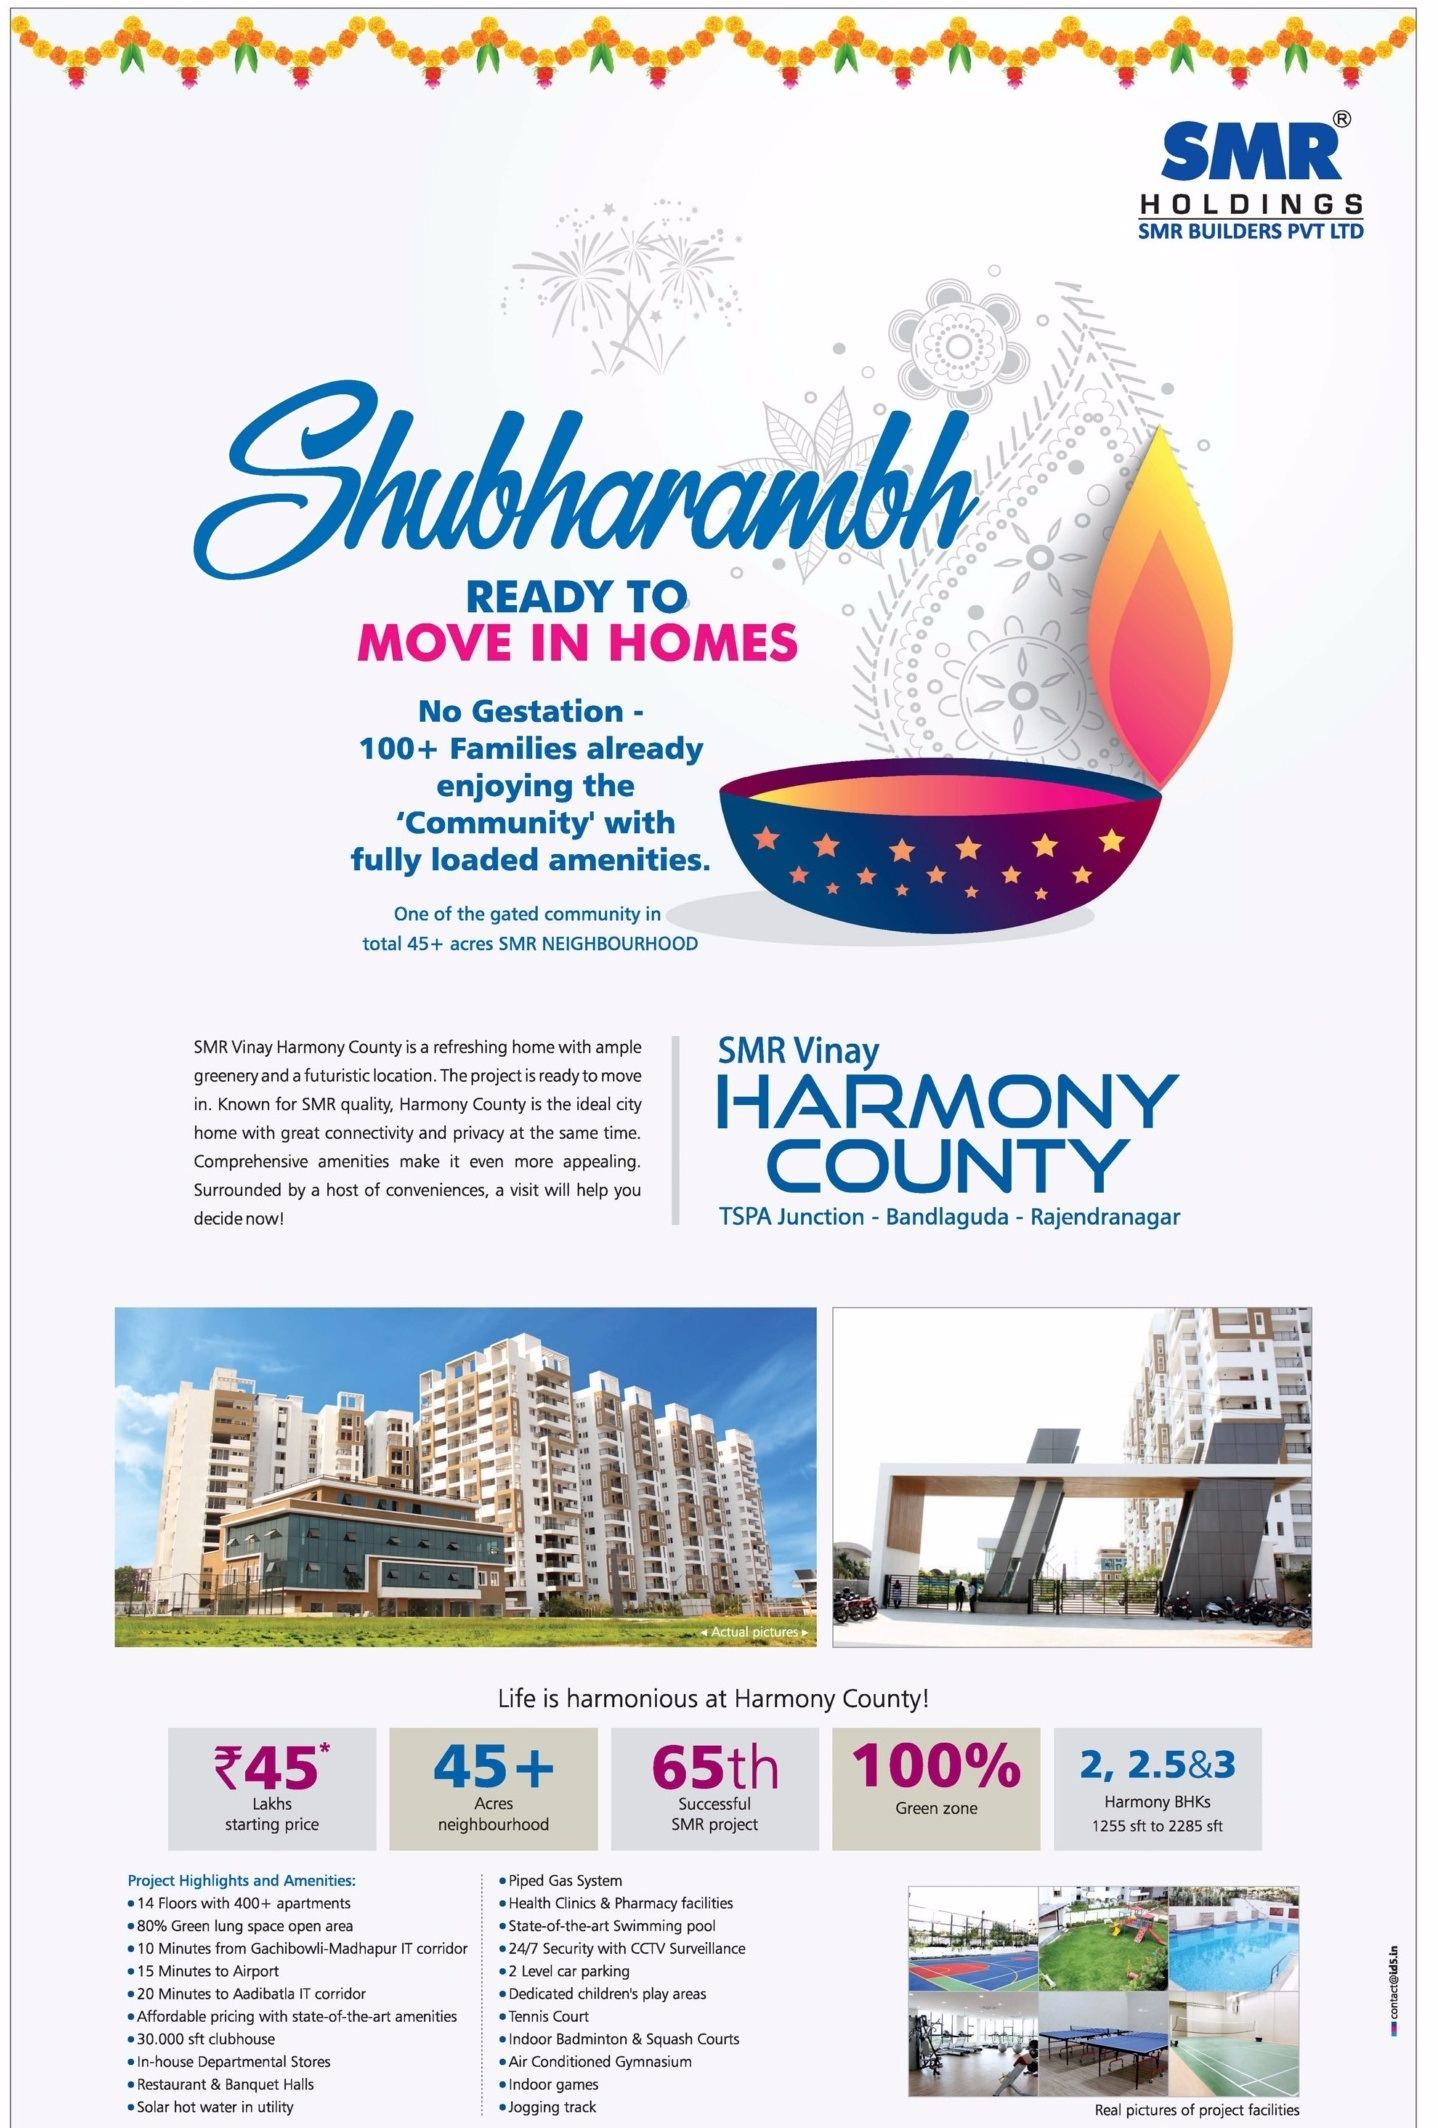 SMR Holdings presents ready to move in homes at SMR Vinay Harmony County in Hyderabad